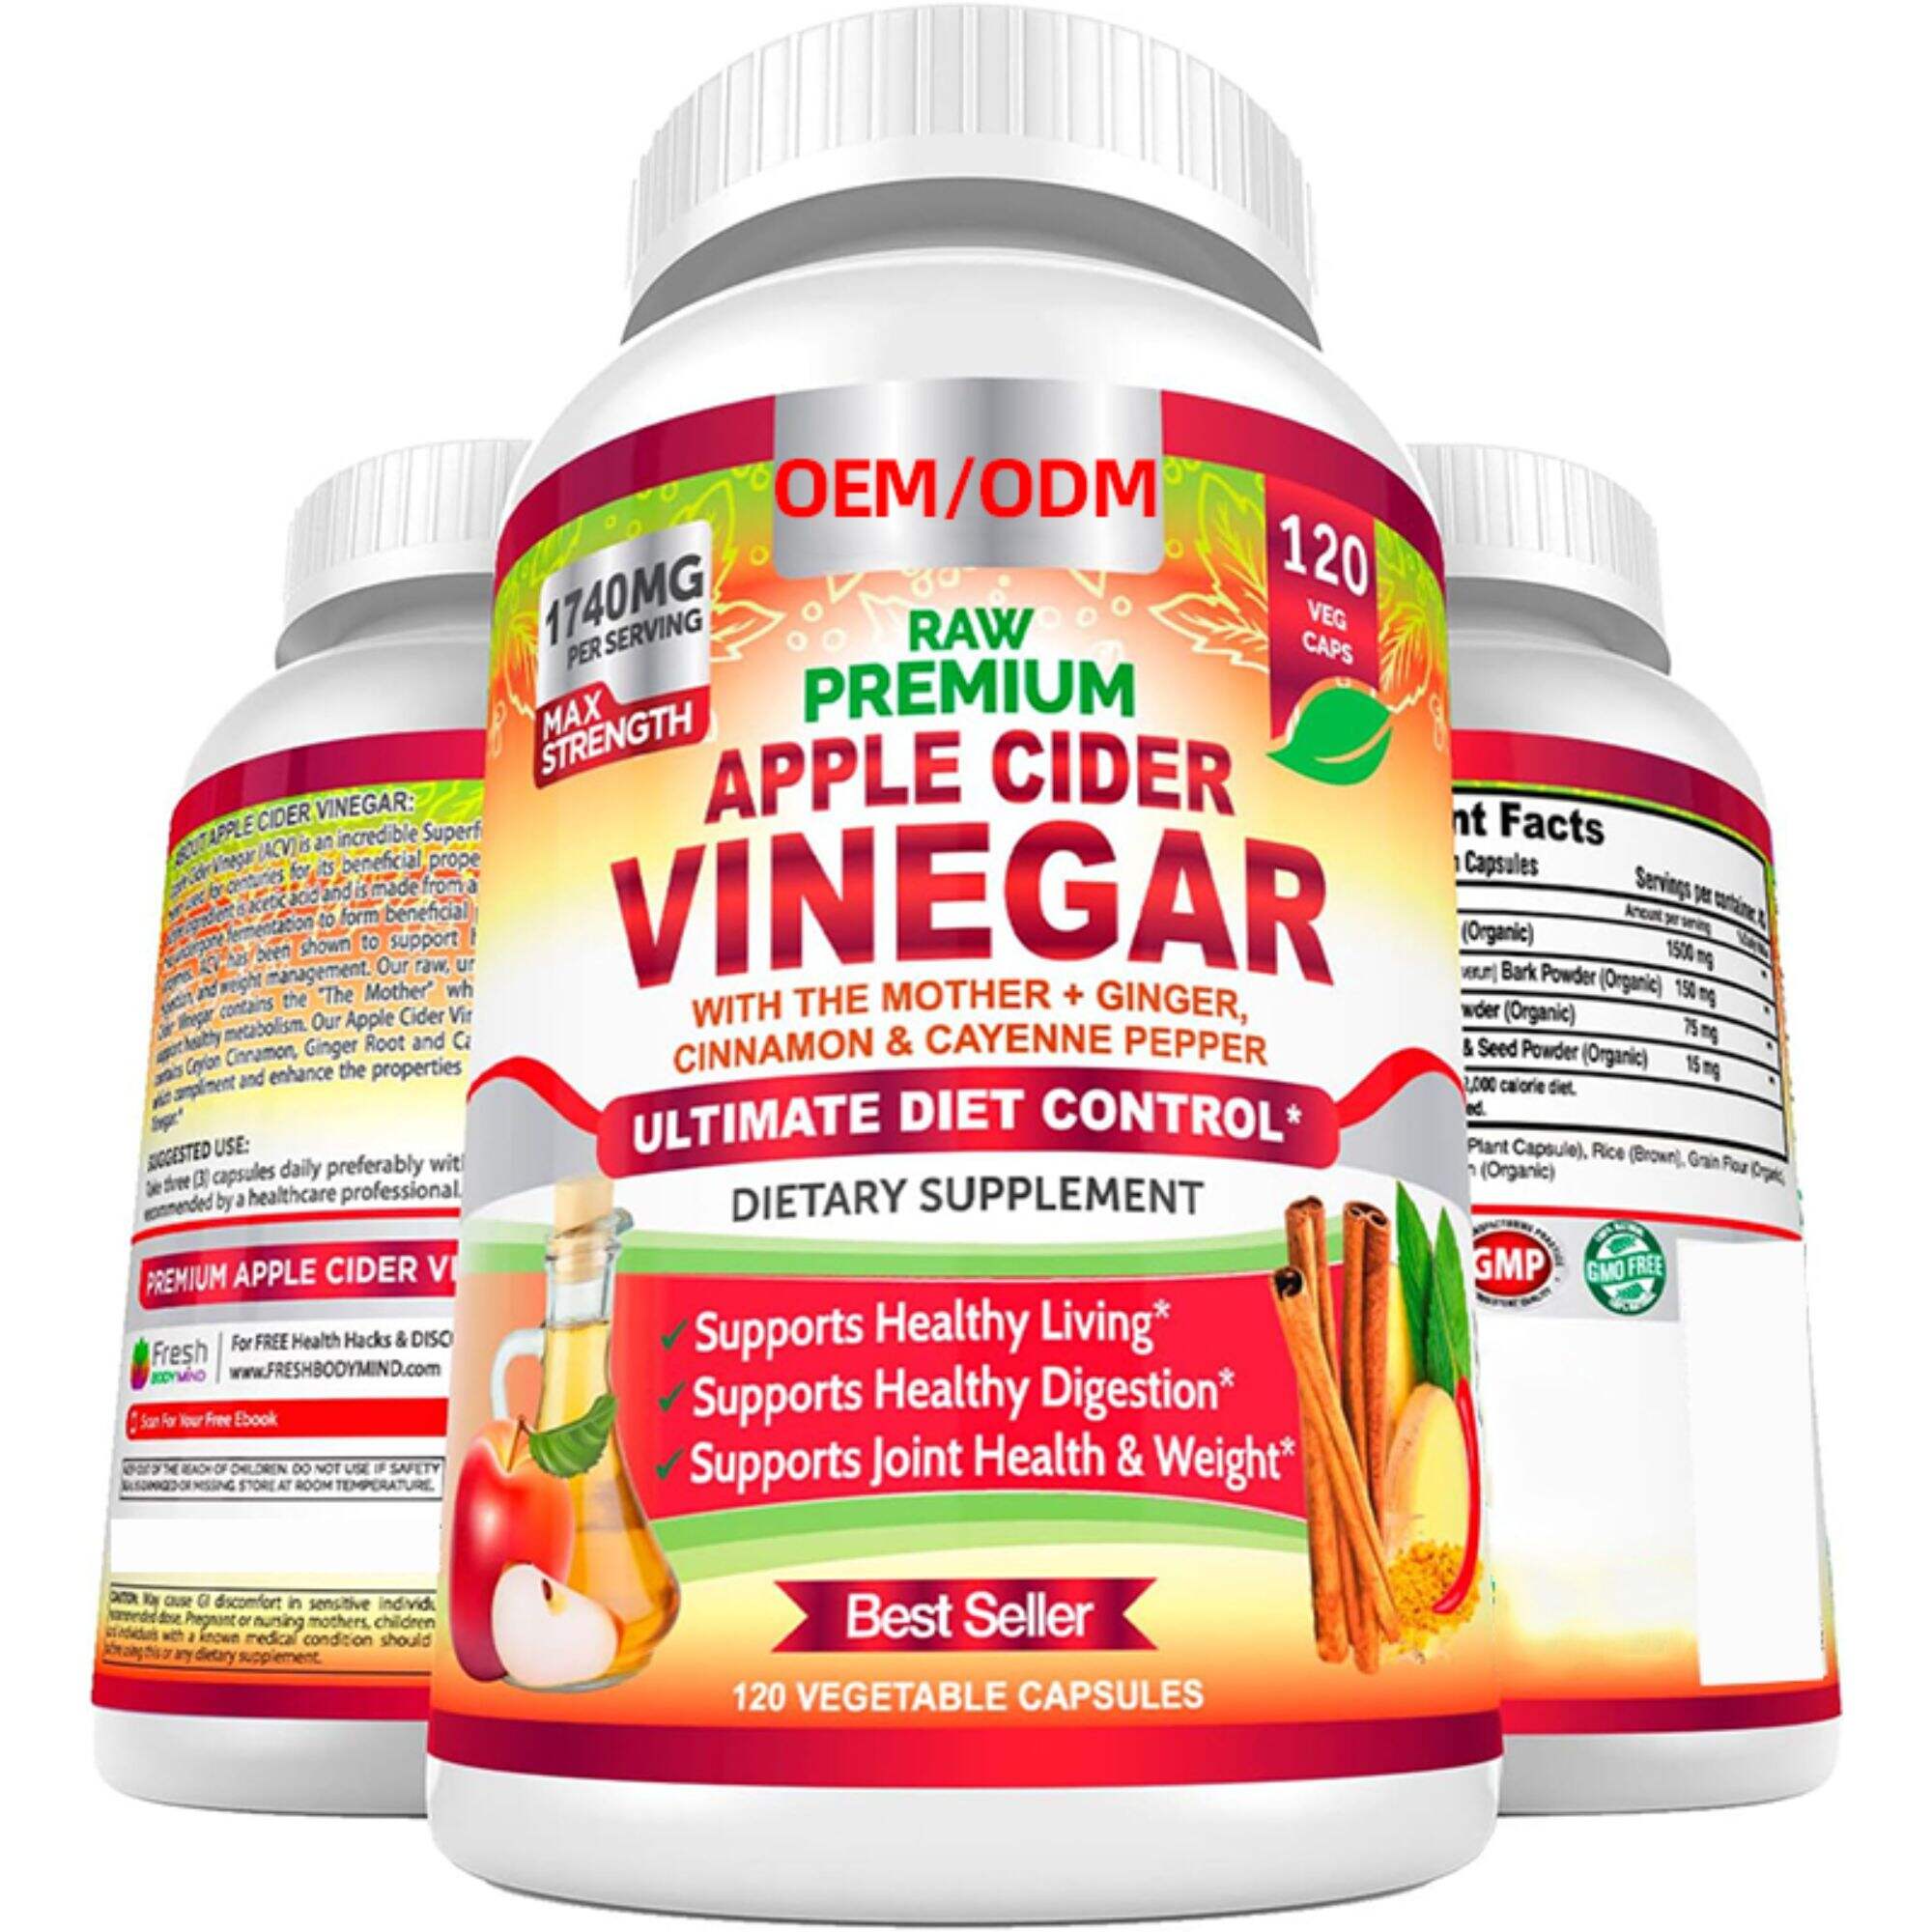 Apple Cider Vinegar Capsules Max 1740mg with 100% Natural & Raw with Cinnamon, Ginger & Cayenne Pepper - Ideal for Healthy Living, Detox & Digestion -120 Vegan Pills